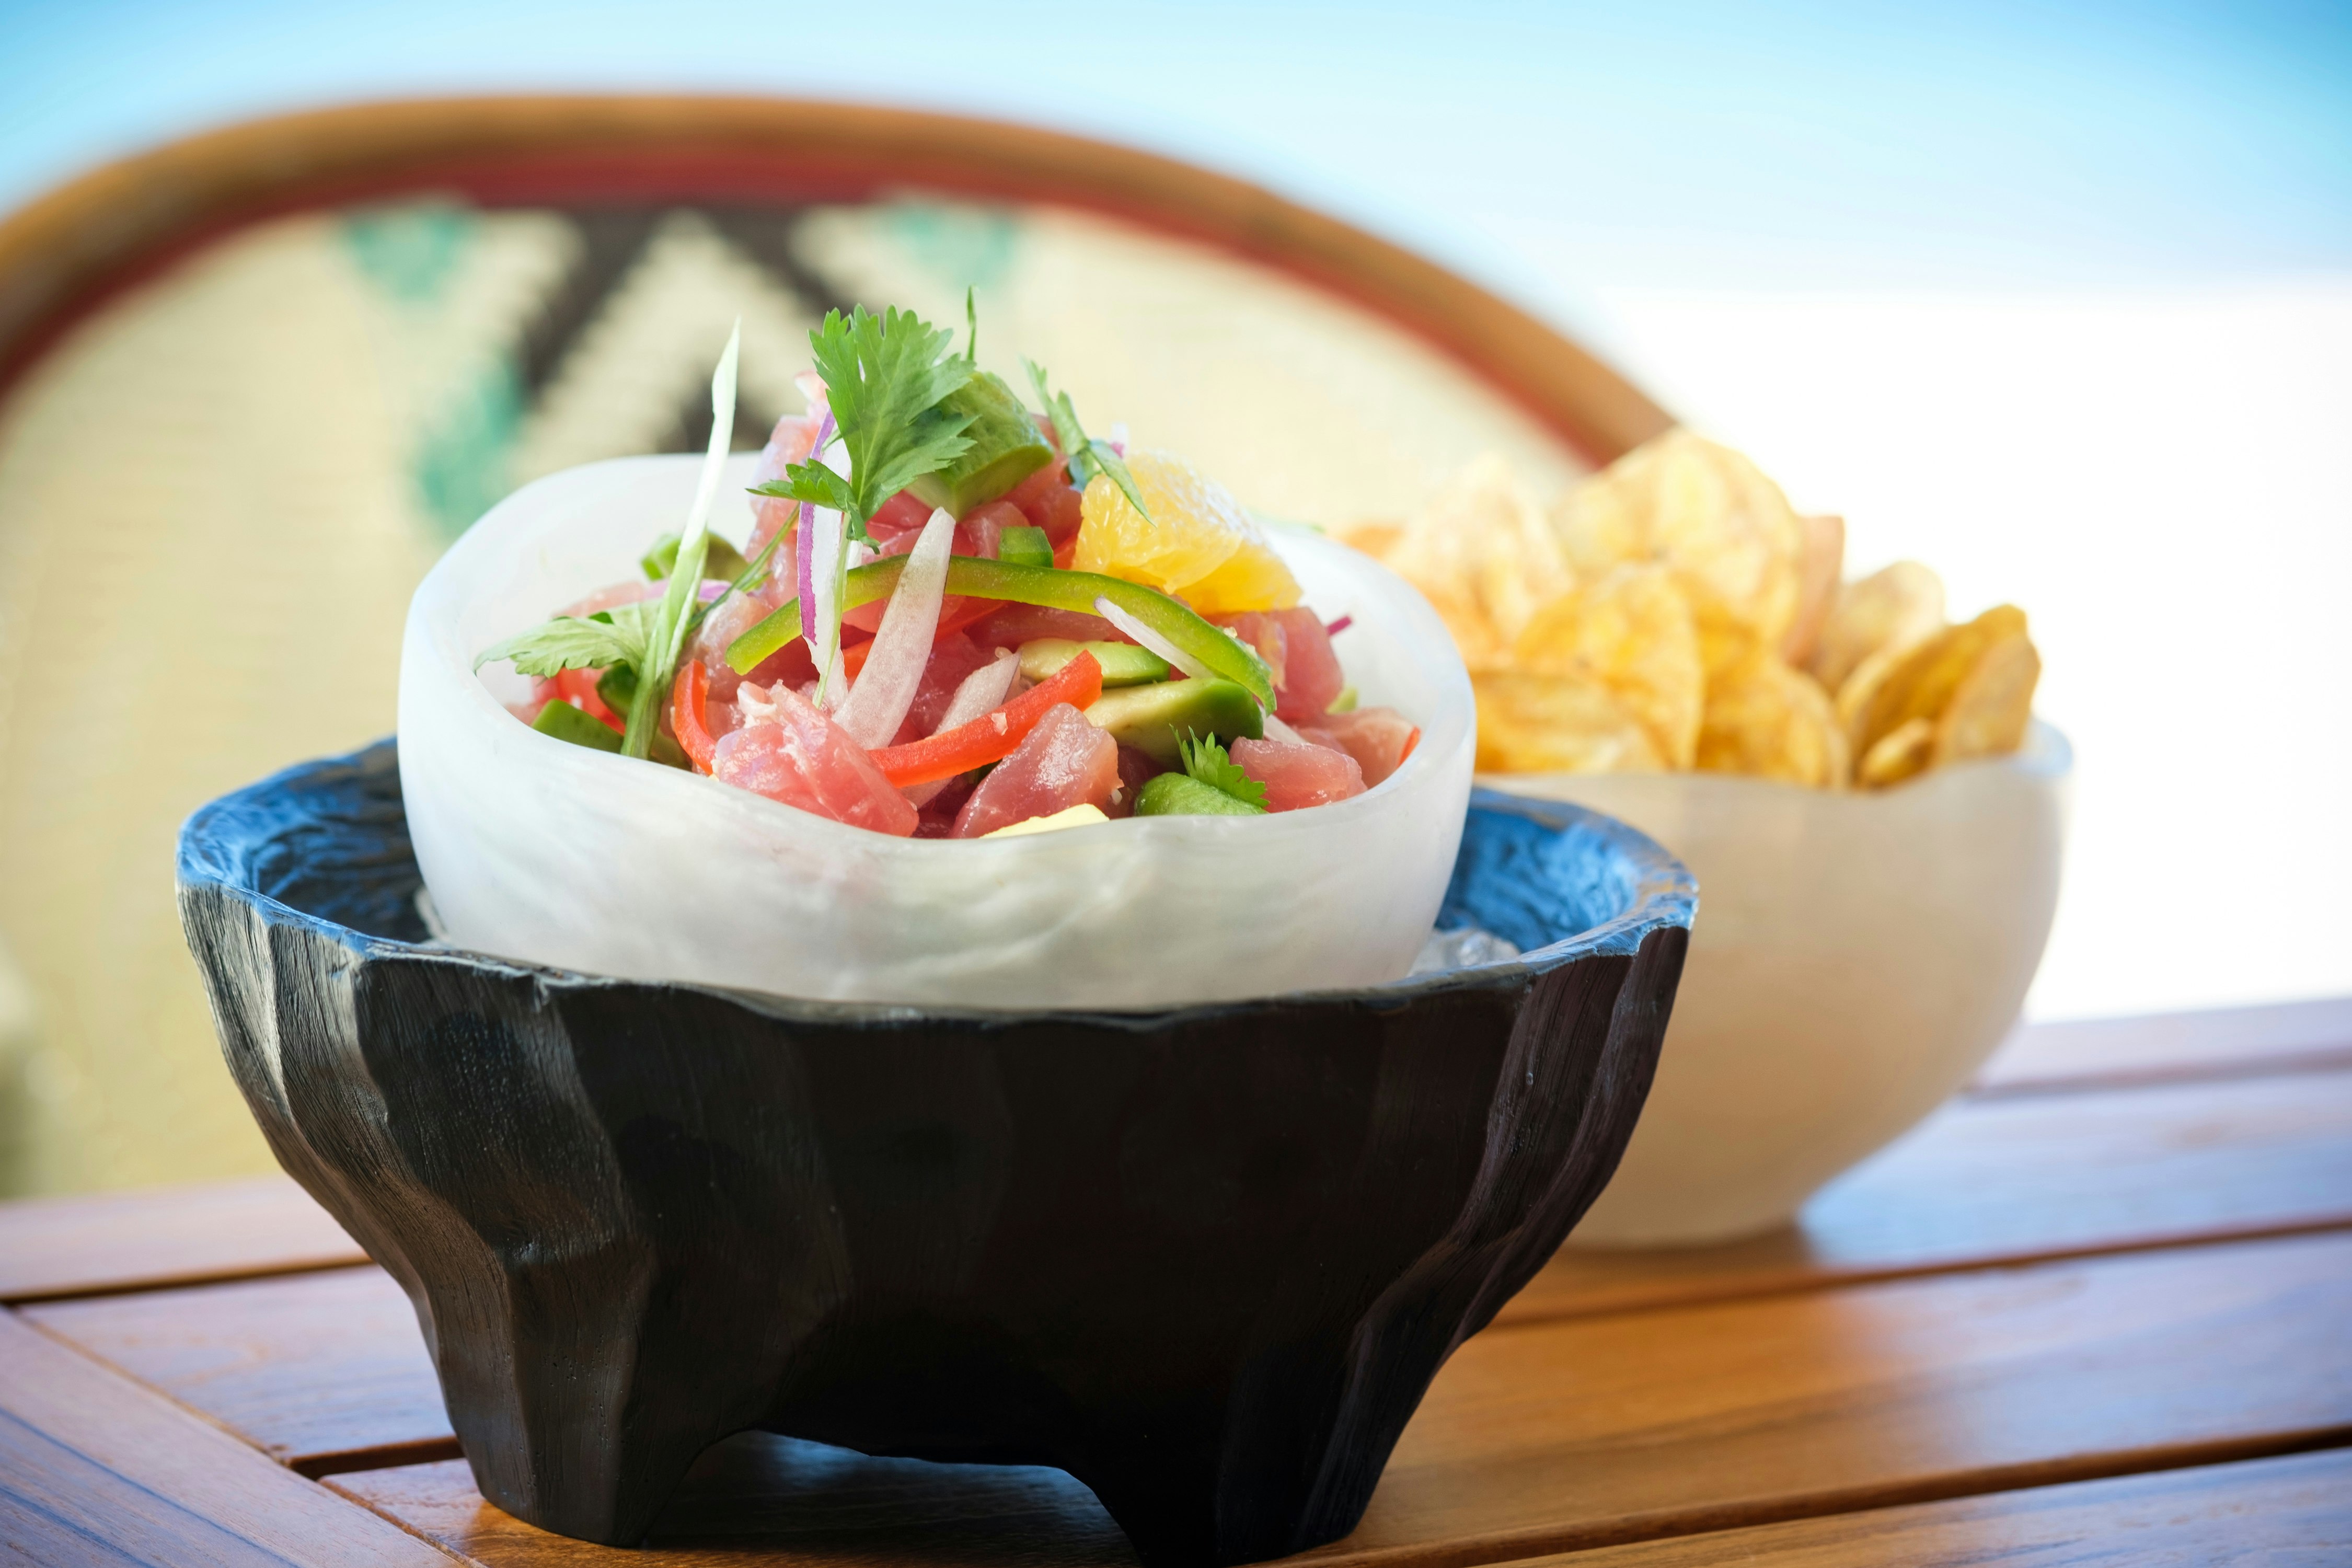 Two bowls on an outdoor table; in the background is a bowl of potato chips, and in the foreground is a bowl filled with a colorful, artistically presented salad.